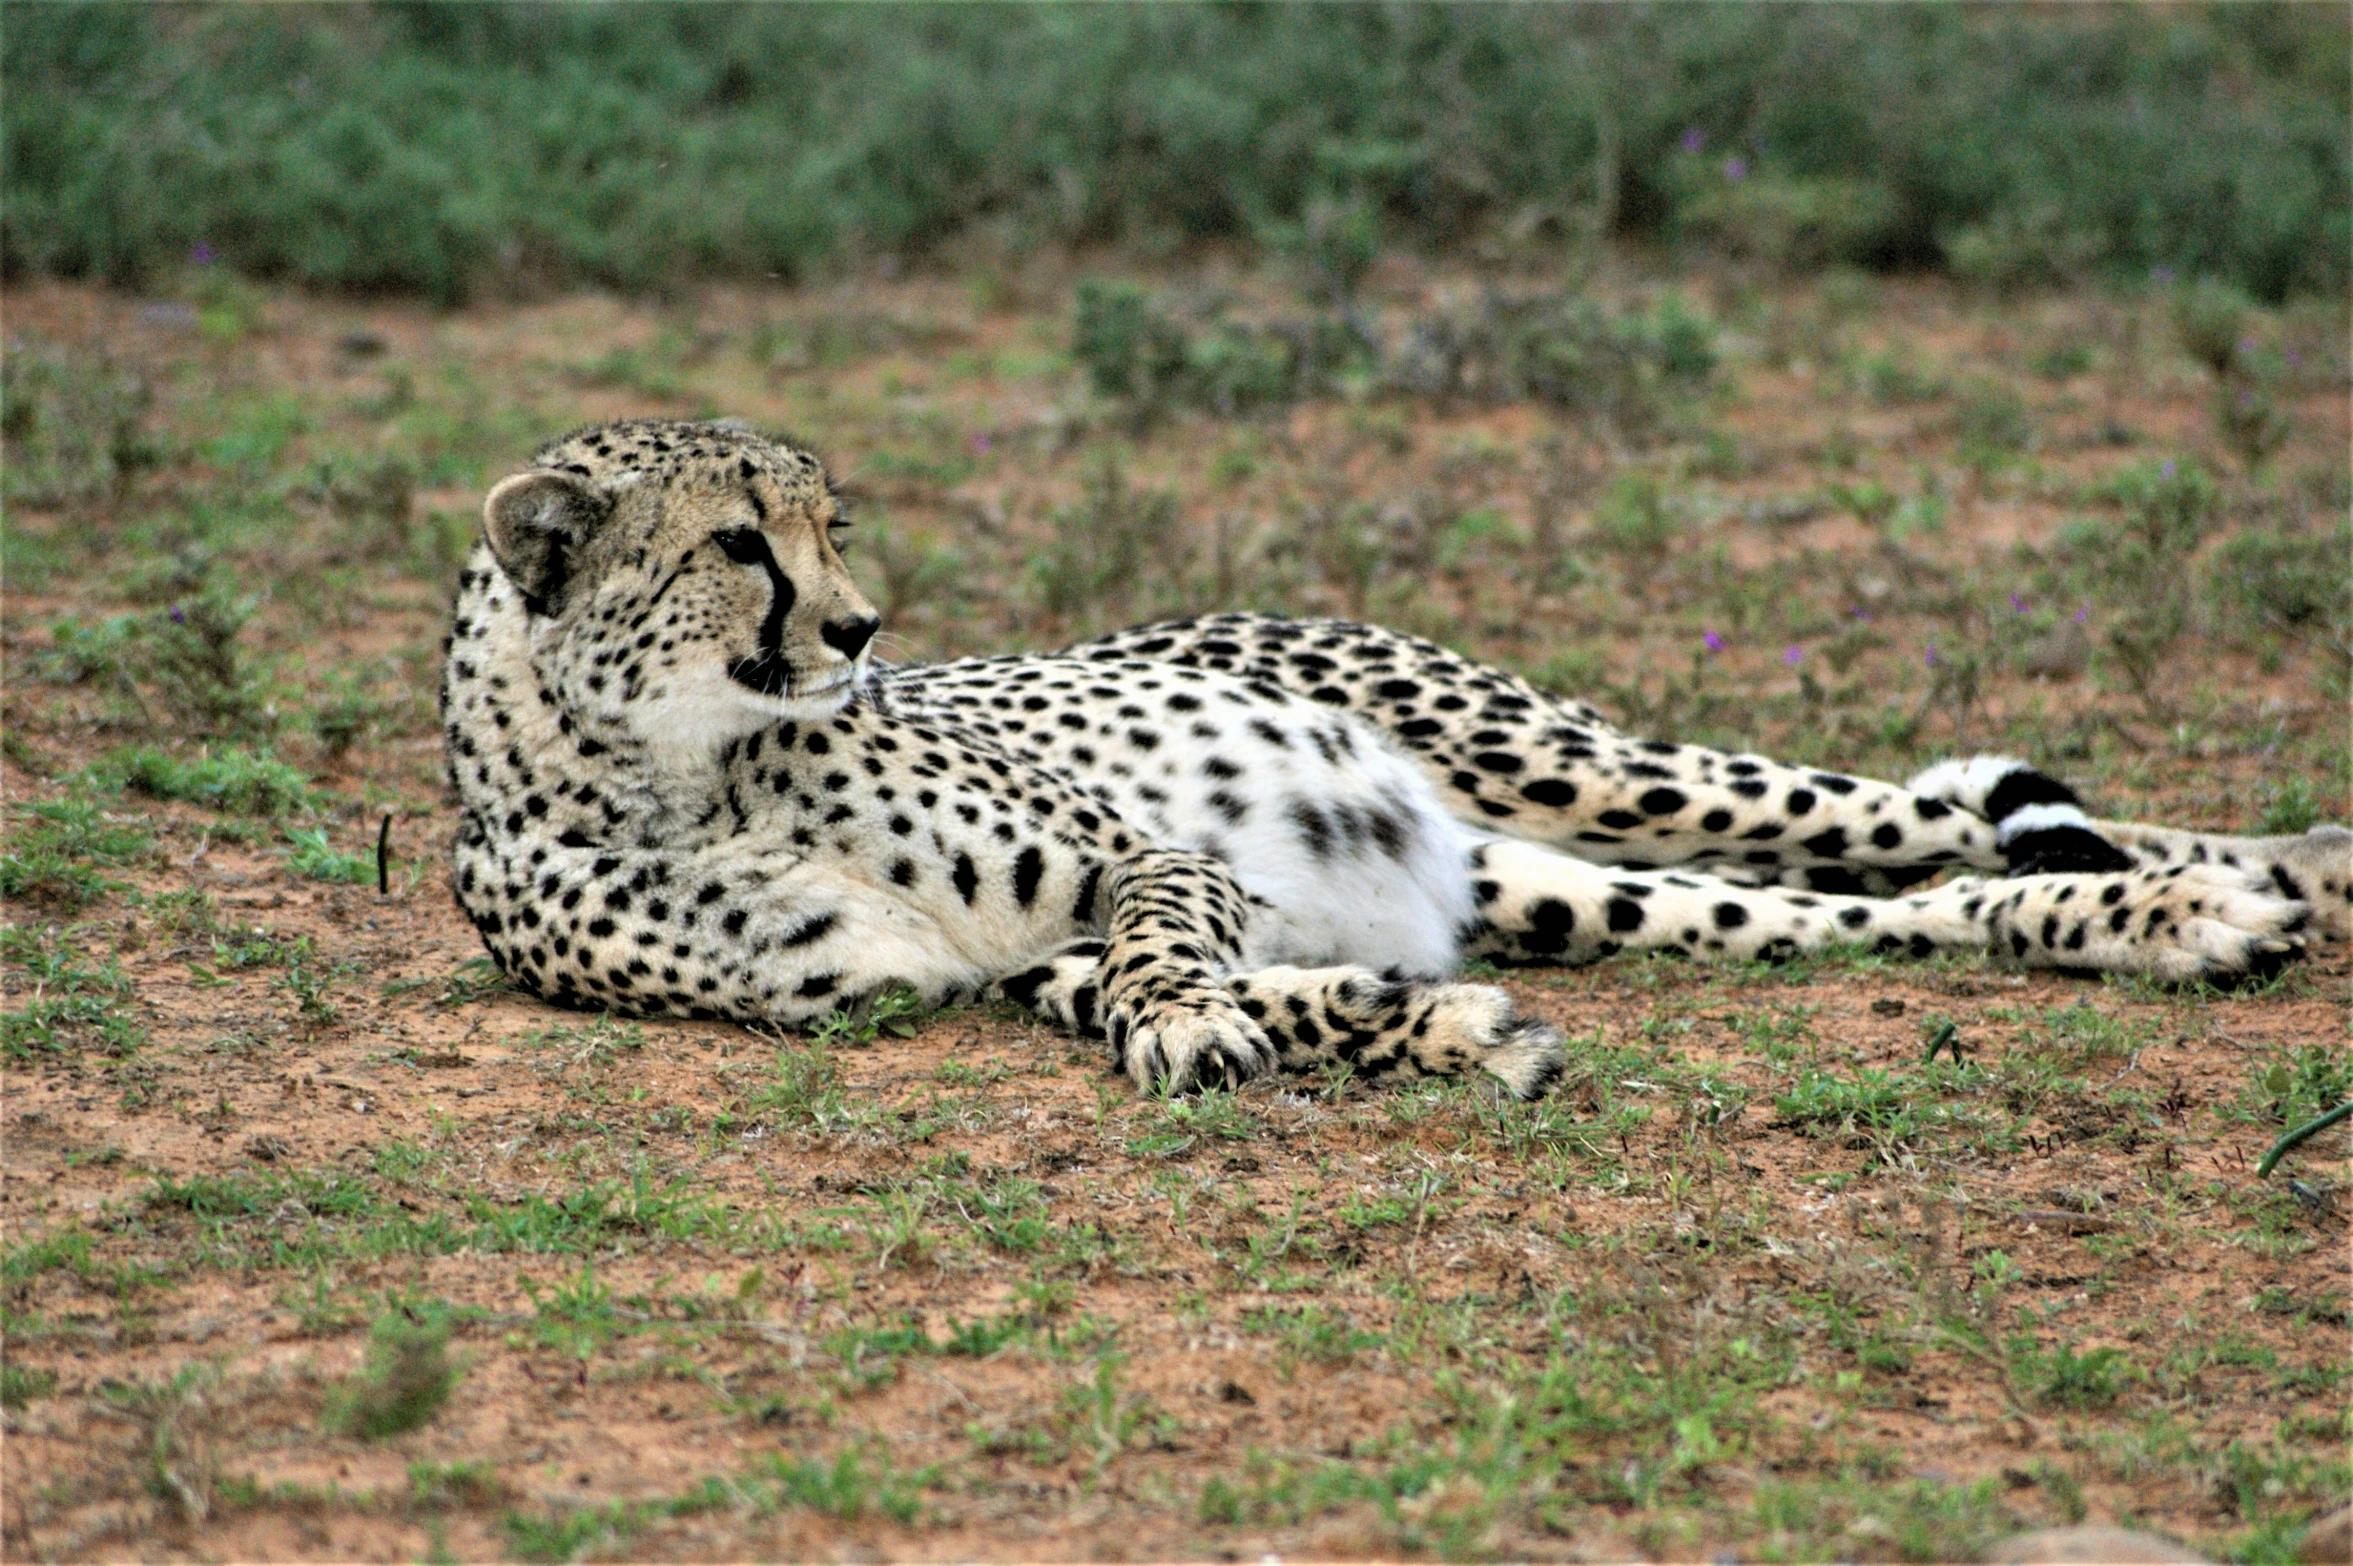 a cheetah laying on a field covered in dirt